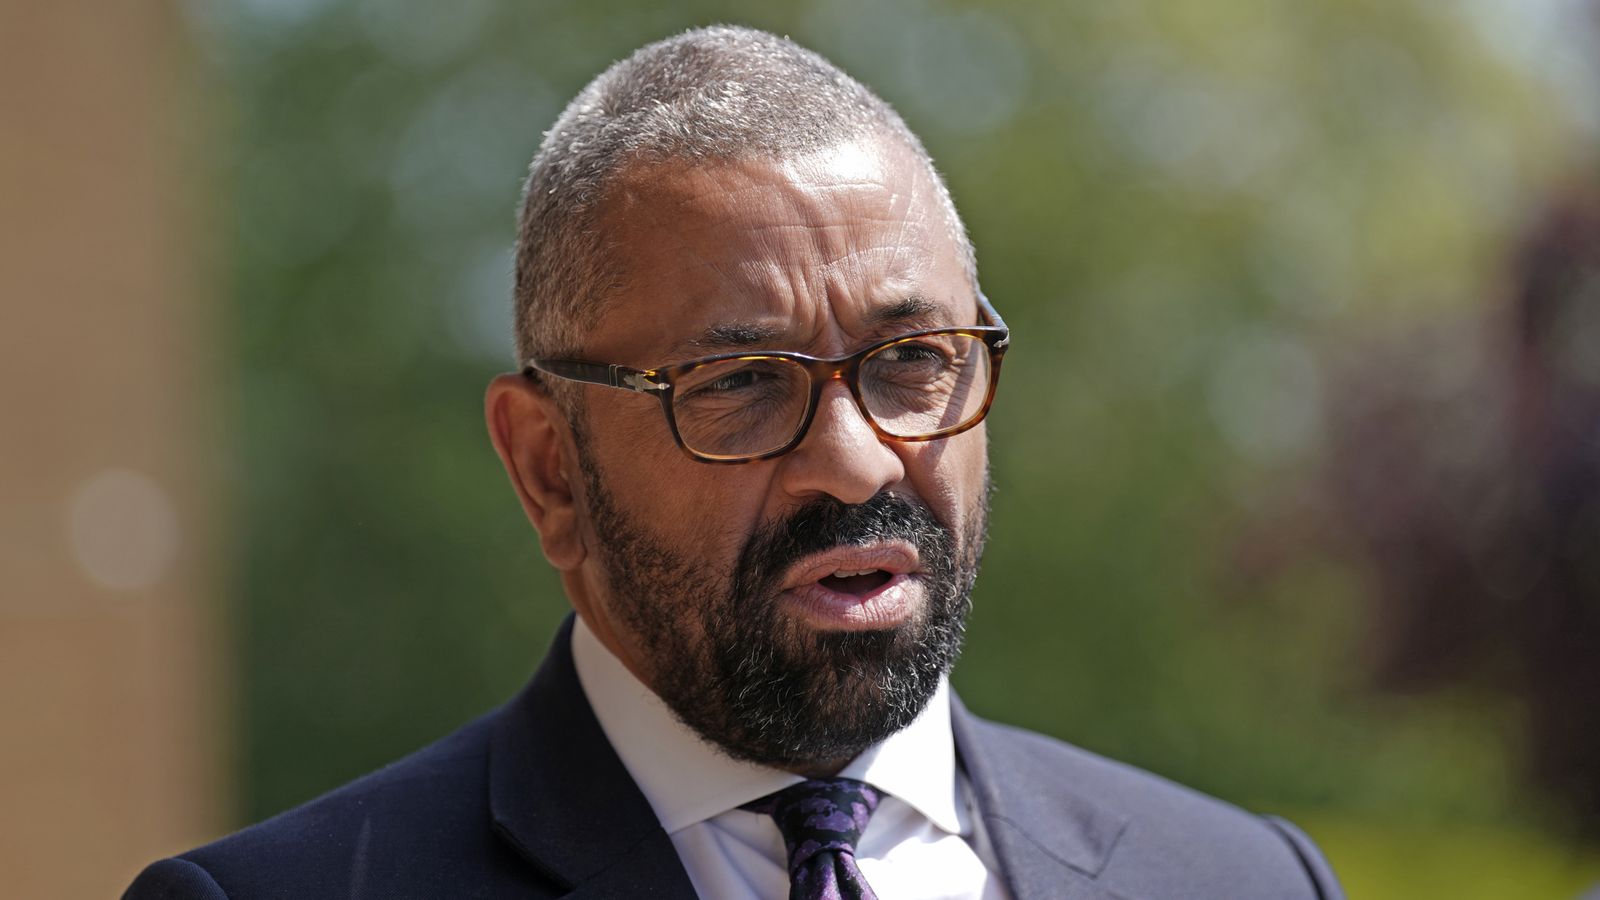 James Cleverly says ‘we must ditch self-indulgent infighting’ as he announces Tory leadership bid | Politics News